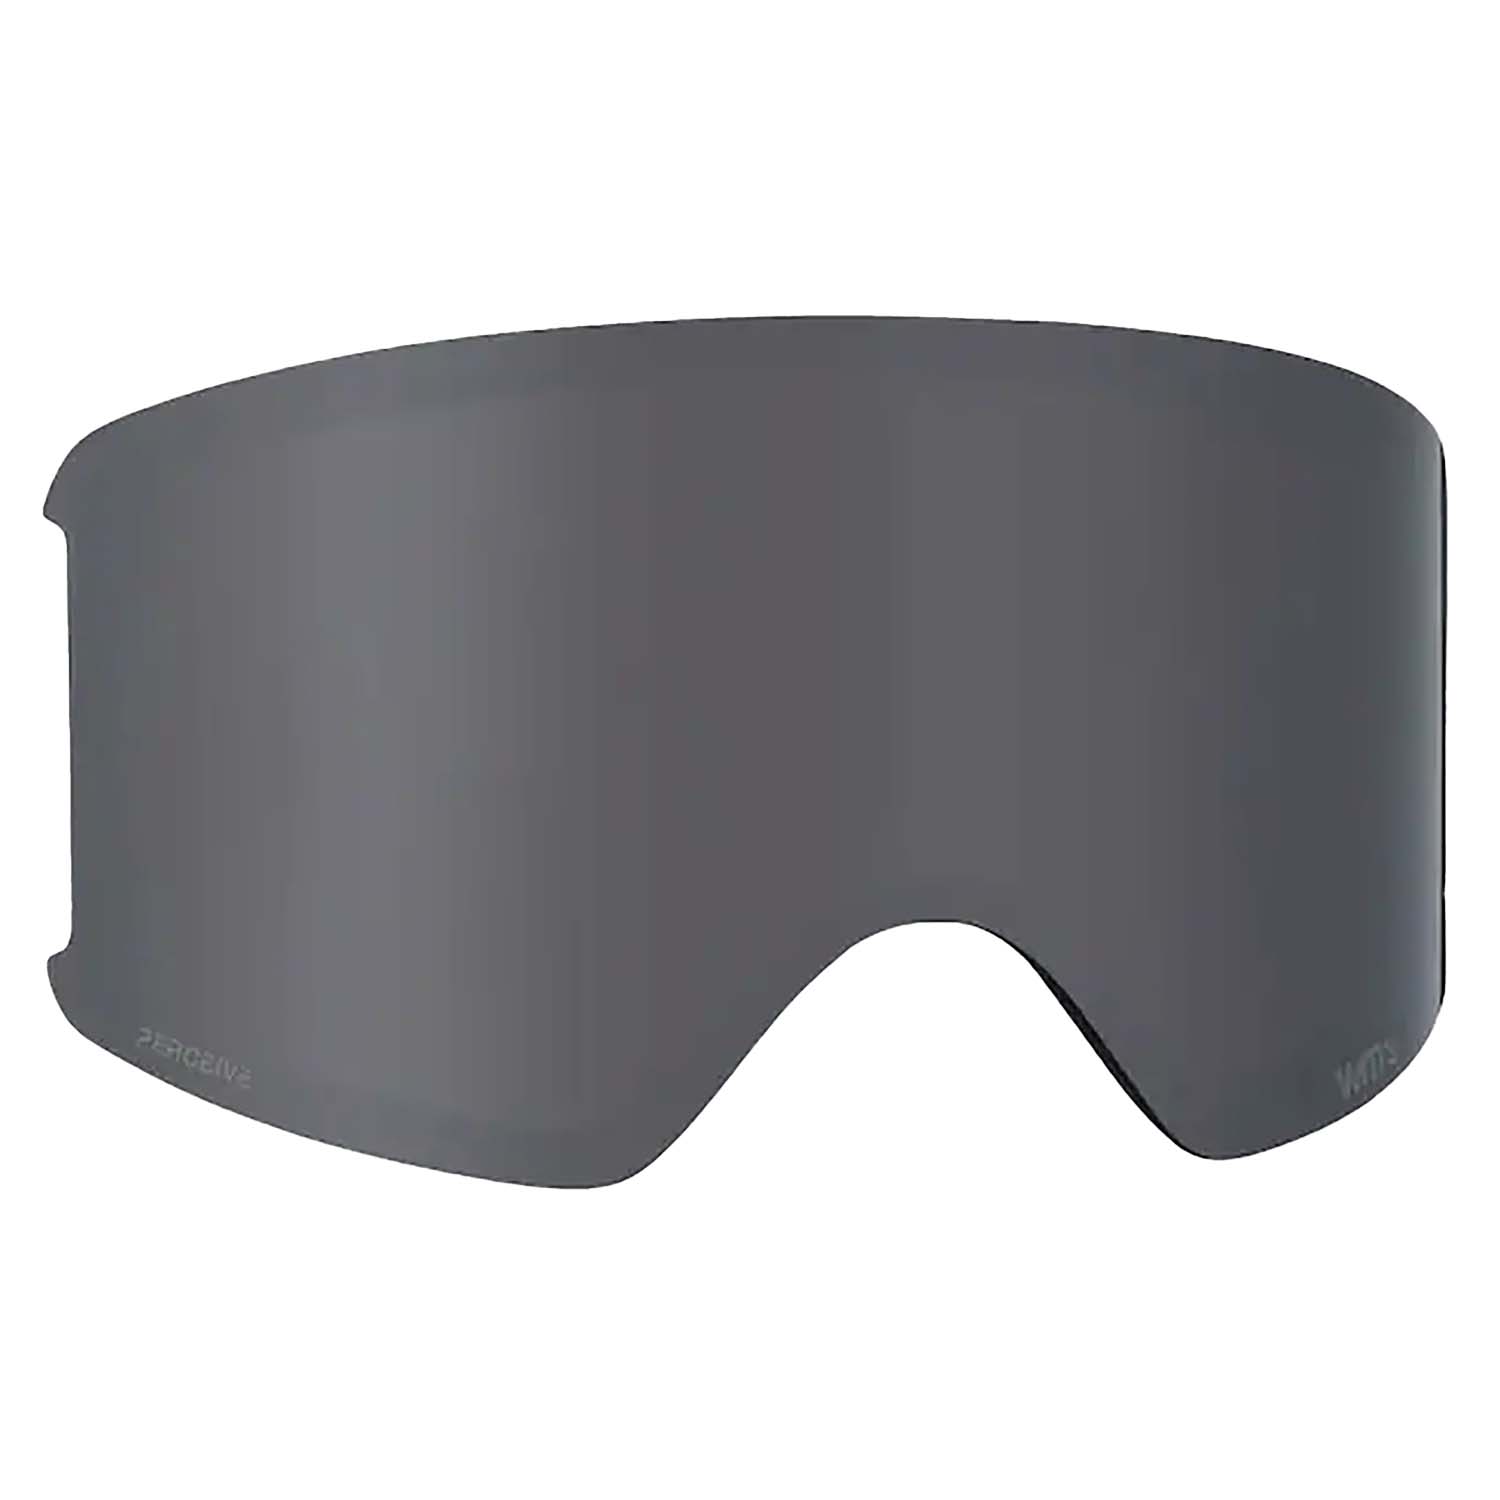 Photos - Other for Winter Sports ANON WM3 Ski/Snowboard Goggle Spare Lens, O/S Perceive Sunny Onyx 